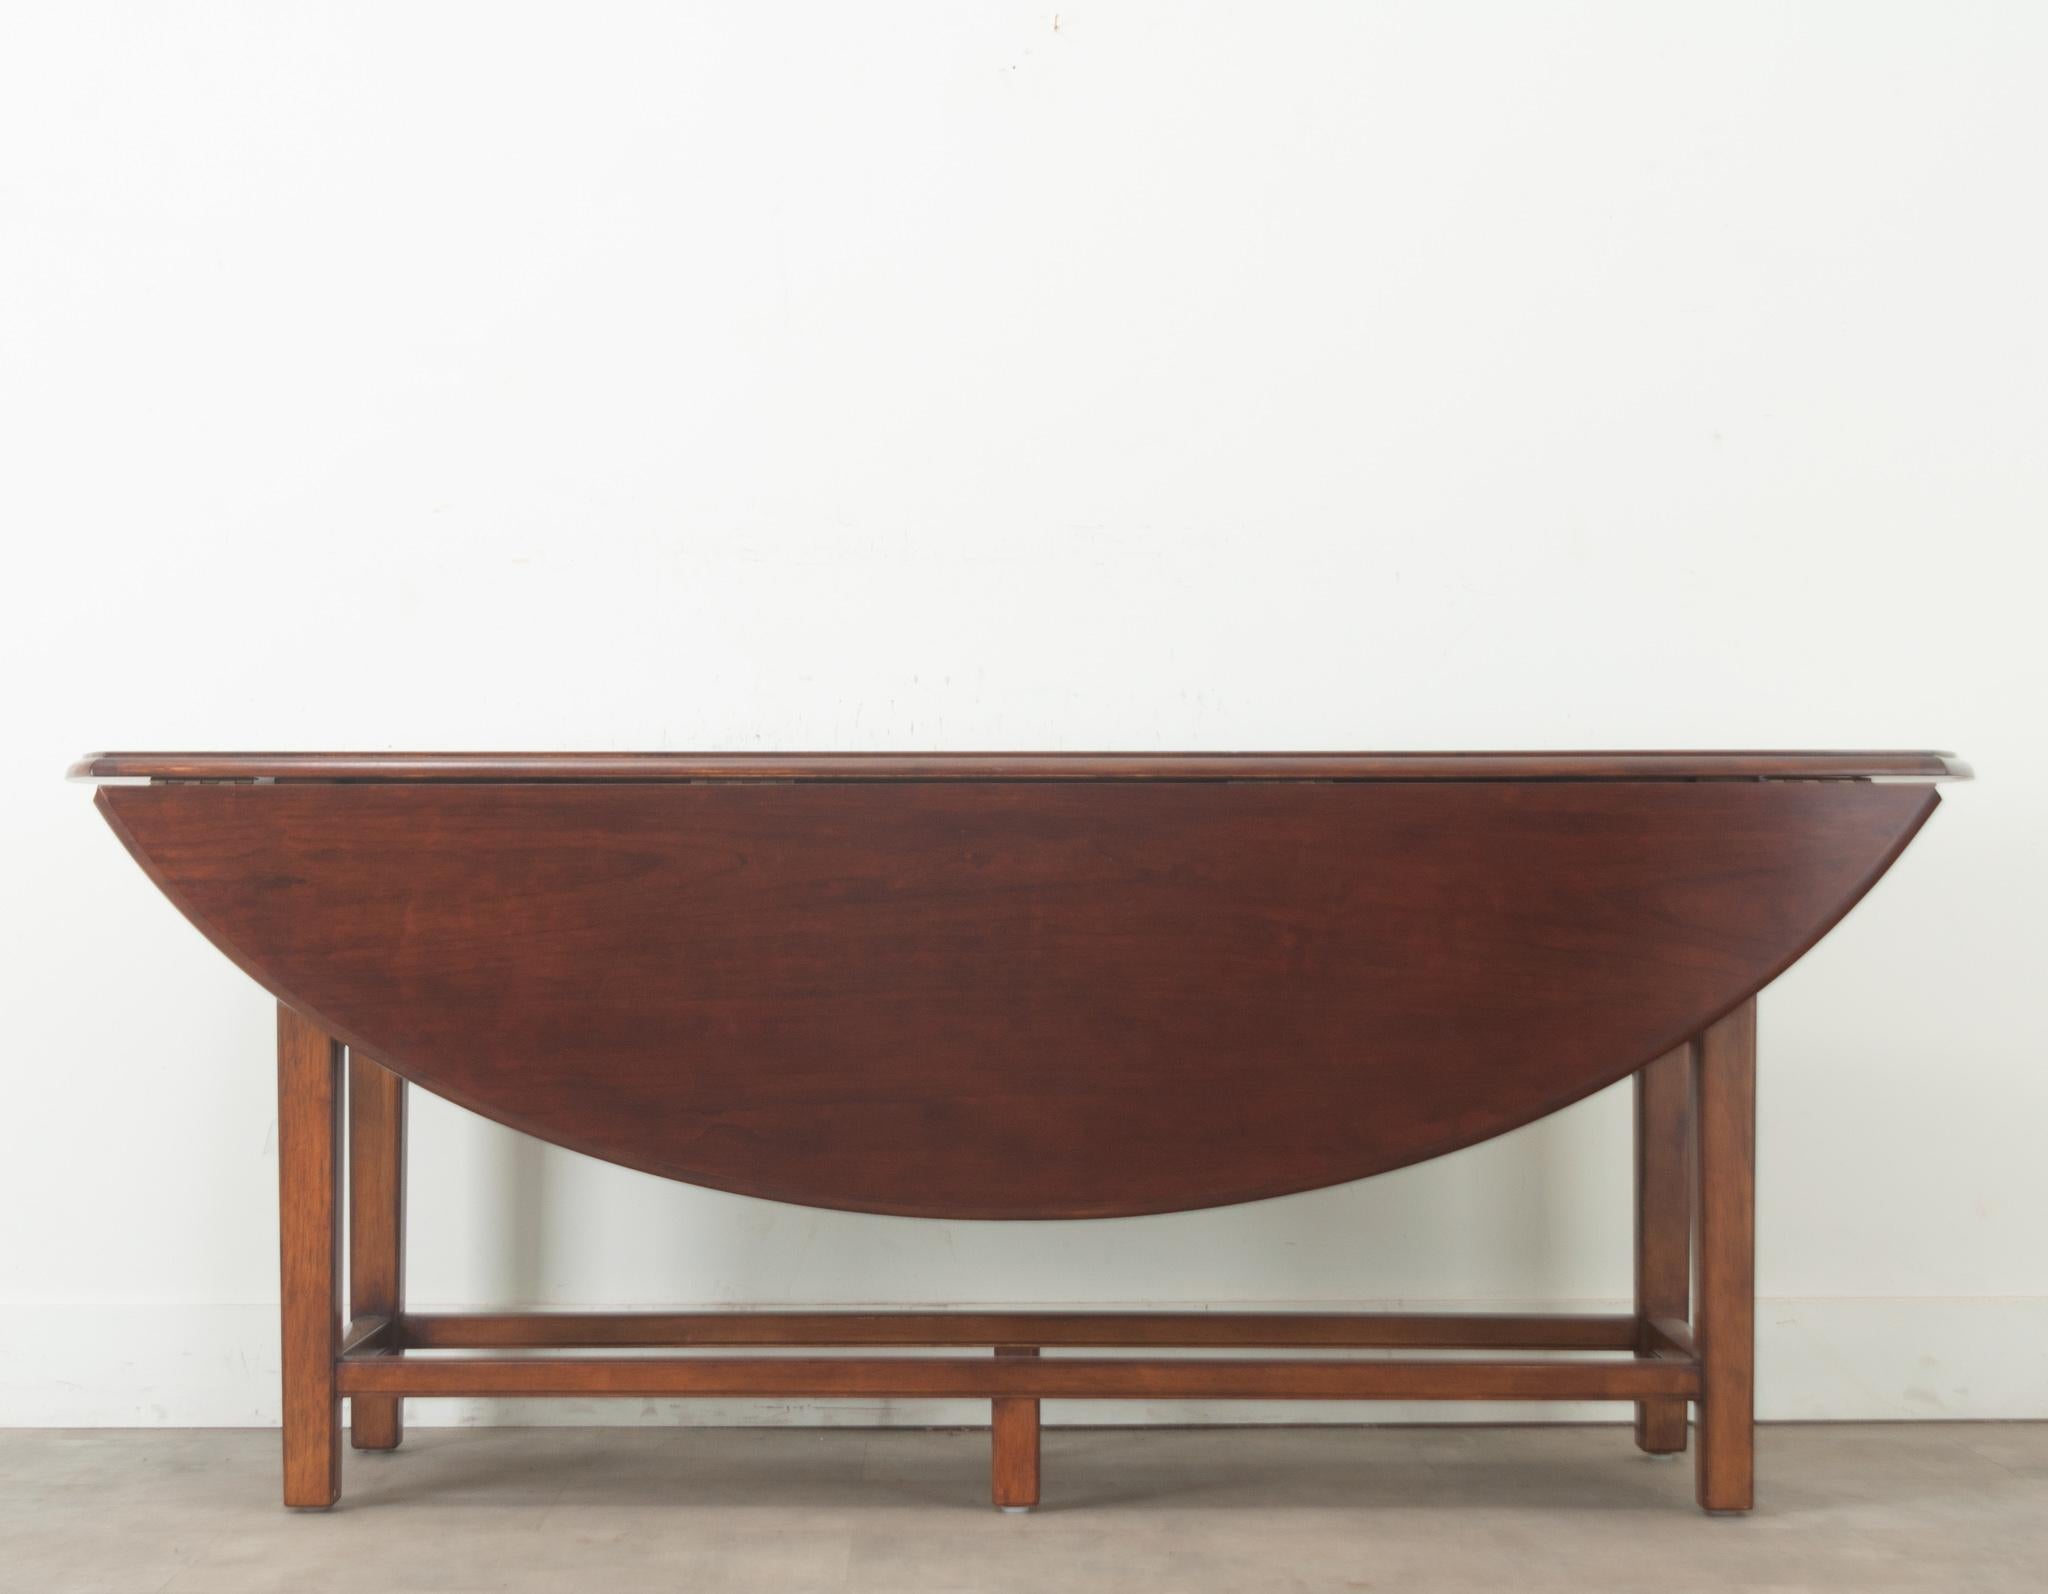 An English drop leaf dining table made of solid mahogany. This versatile dining table can be used as a console or a dining table. Four legs are connected with a sturdy stretcher adding support to this classic dining table. The drop leaves are